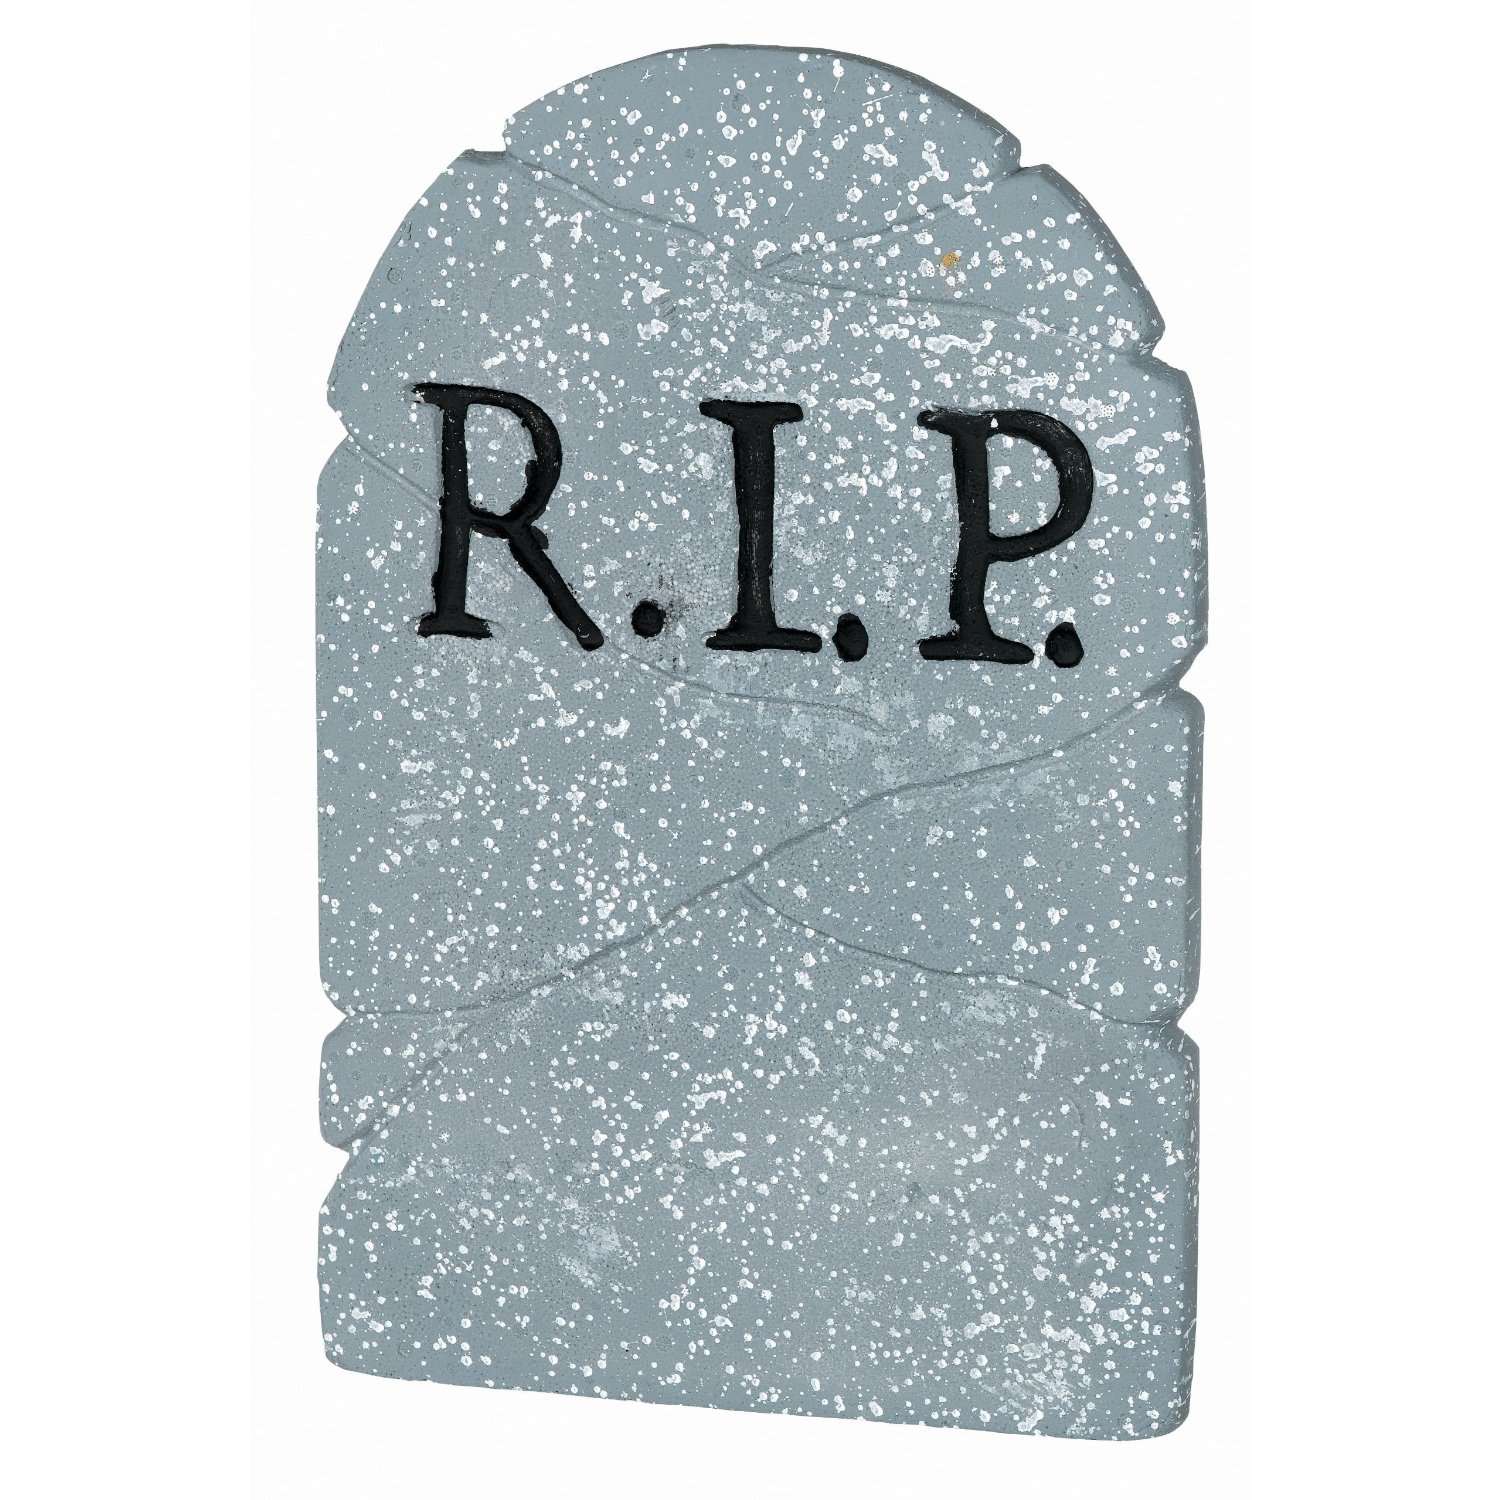 11 Rip Tombstone Free Cliparts That You Can Download To You Computer    